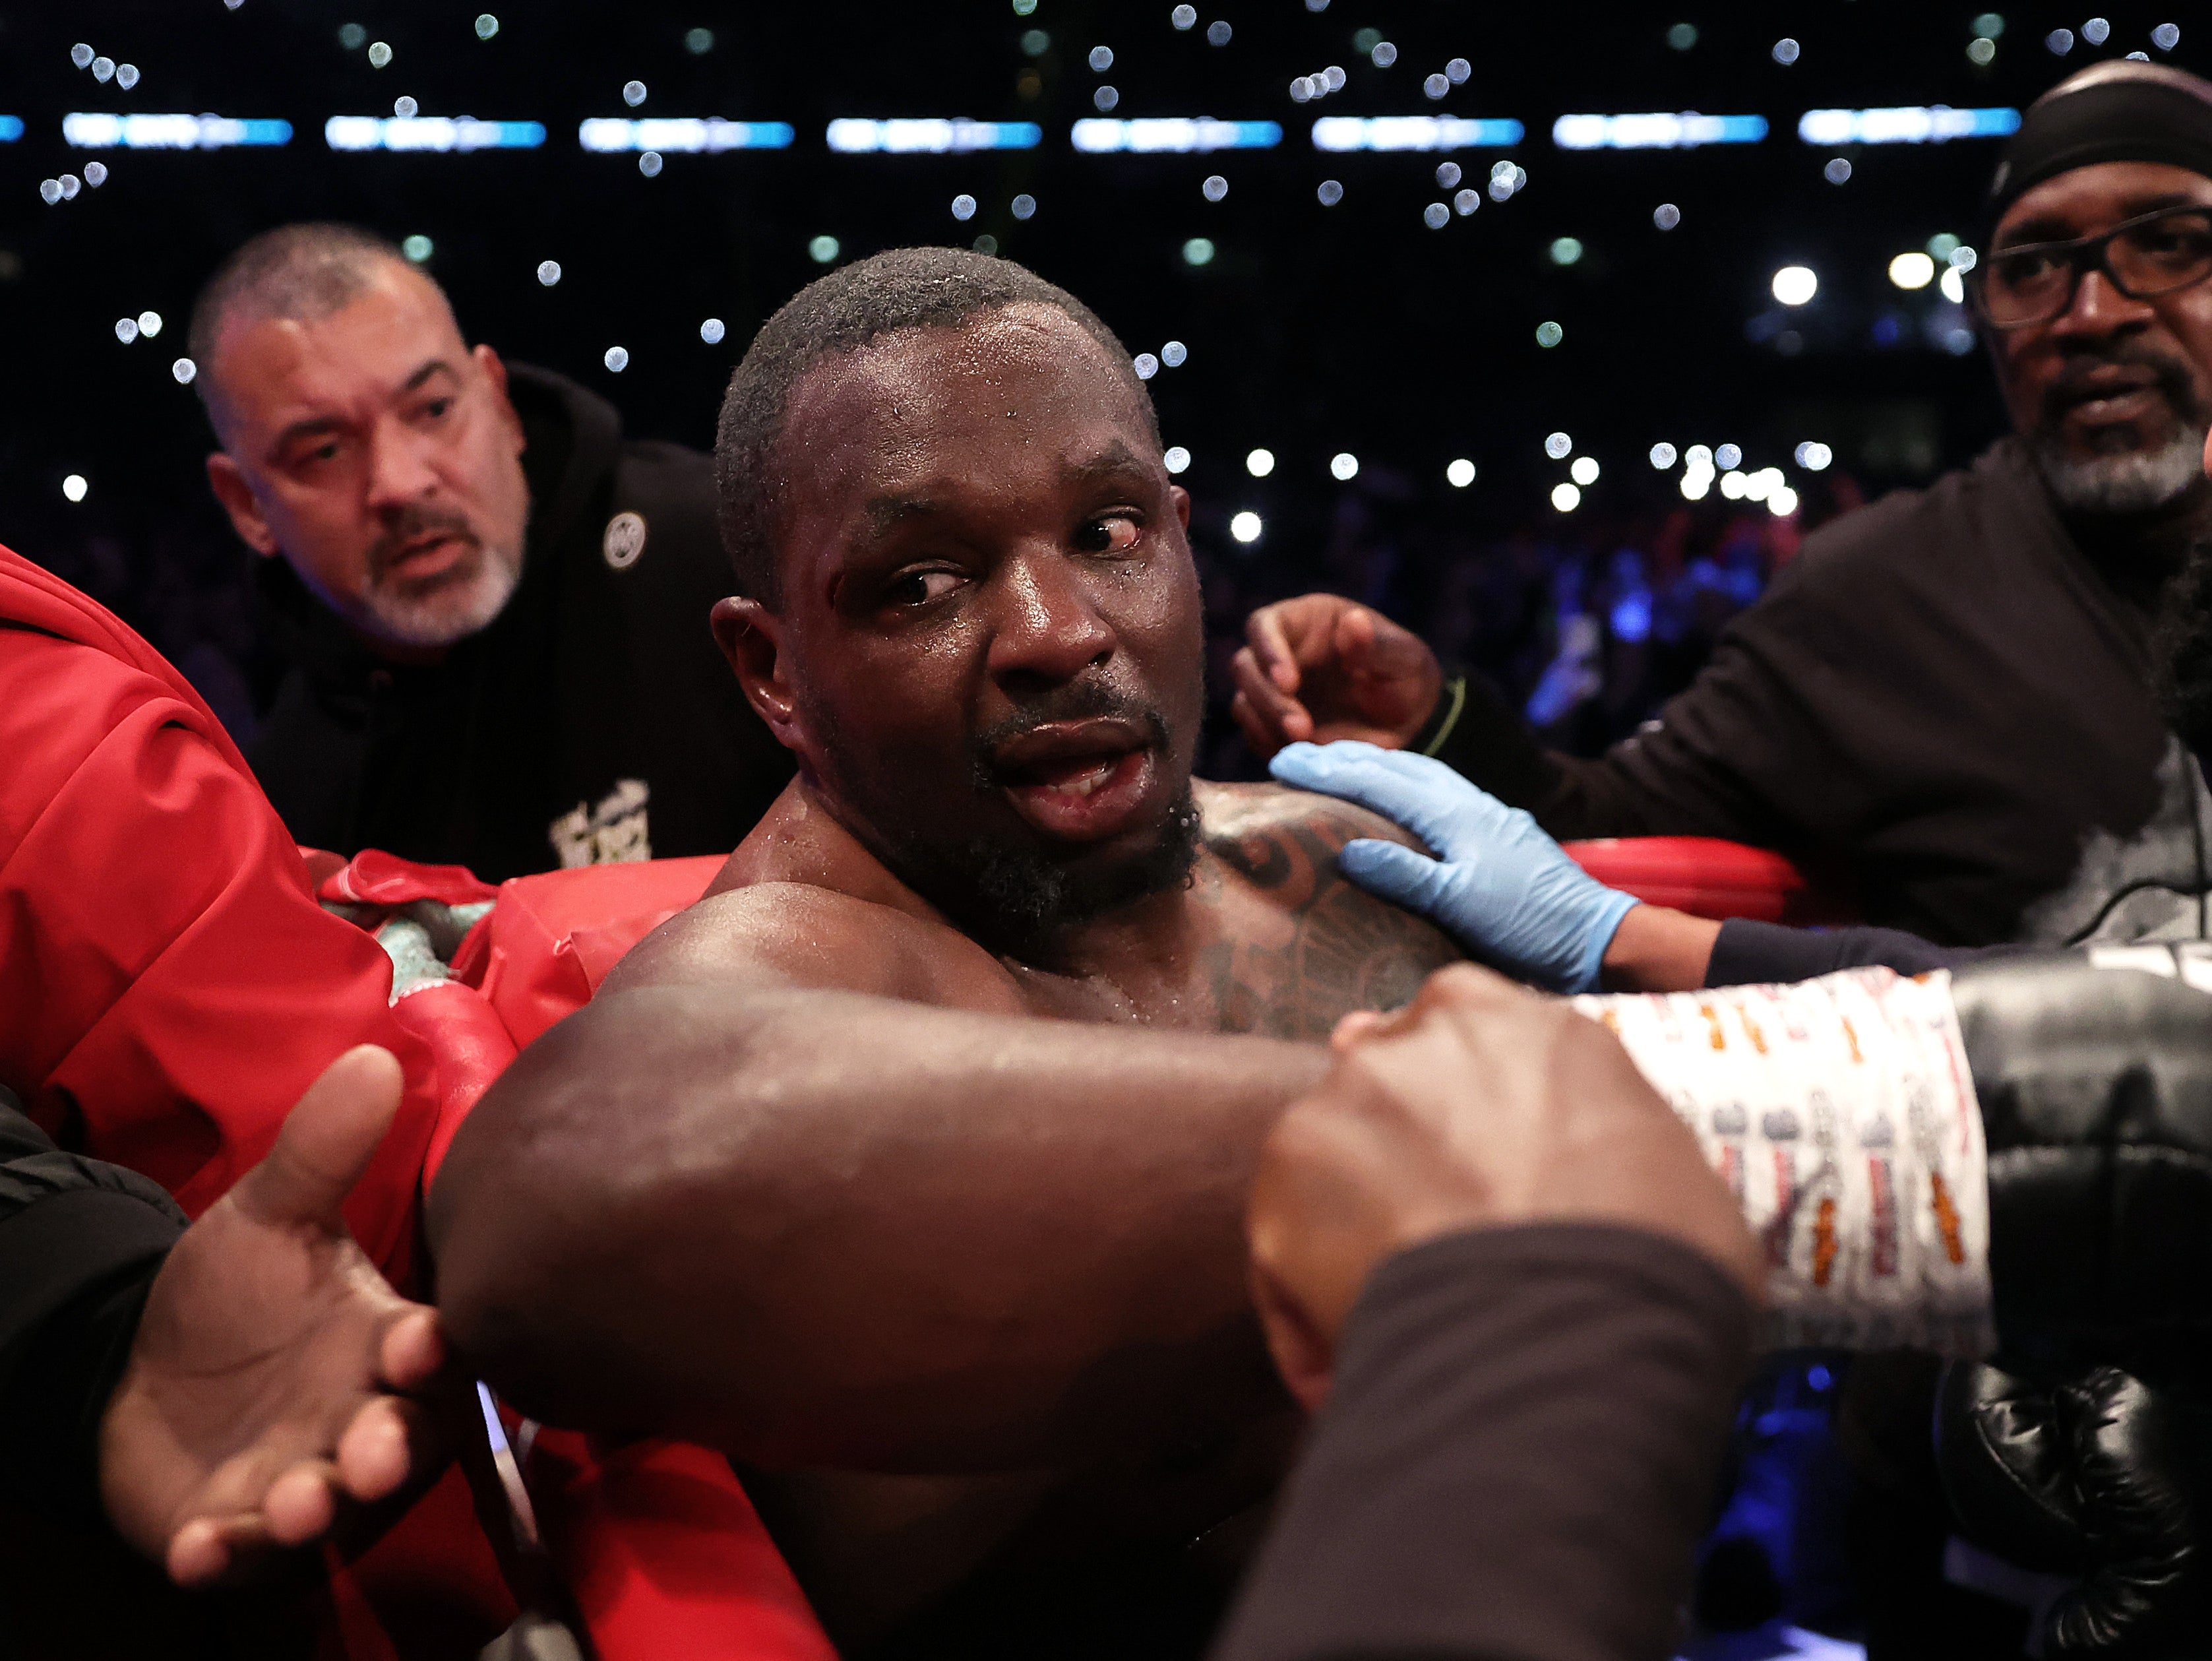 Dillian Whyte suffered a knockout loss to Tyson Fury in April, with the WBC title on the line